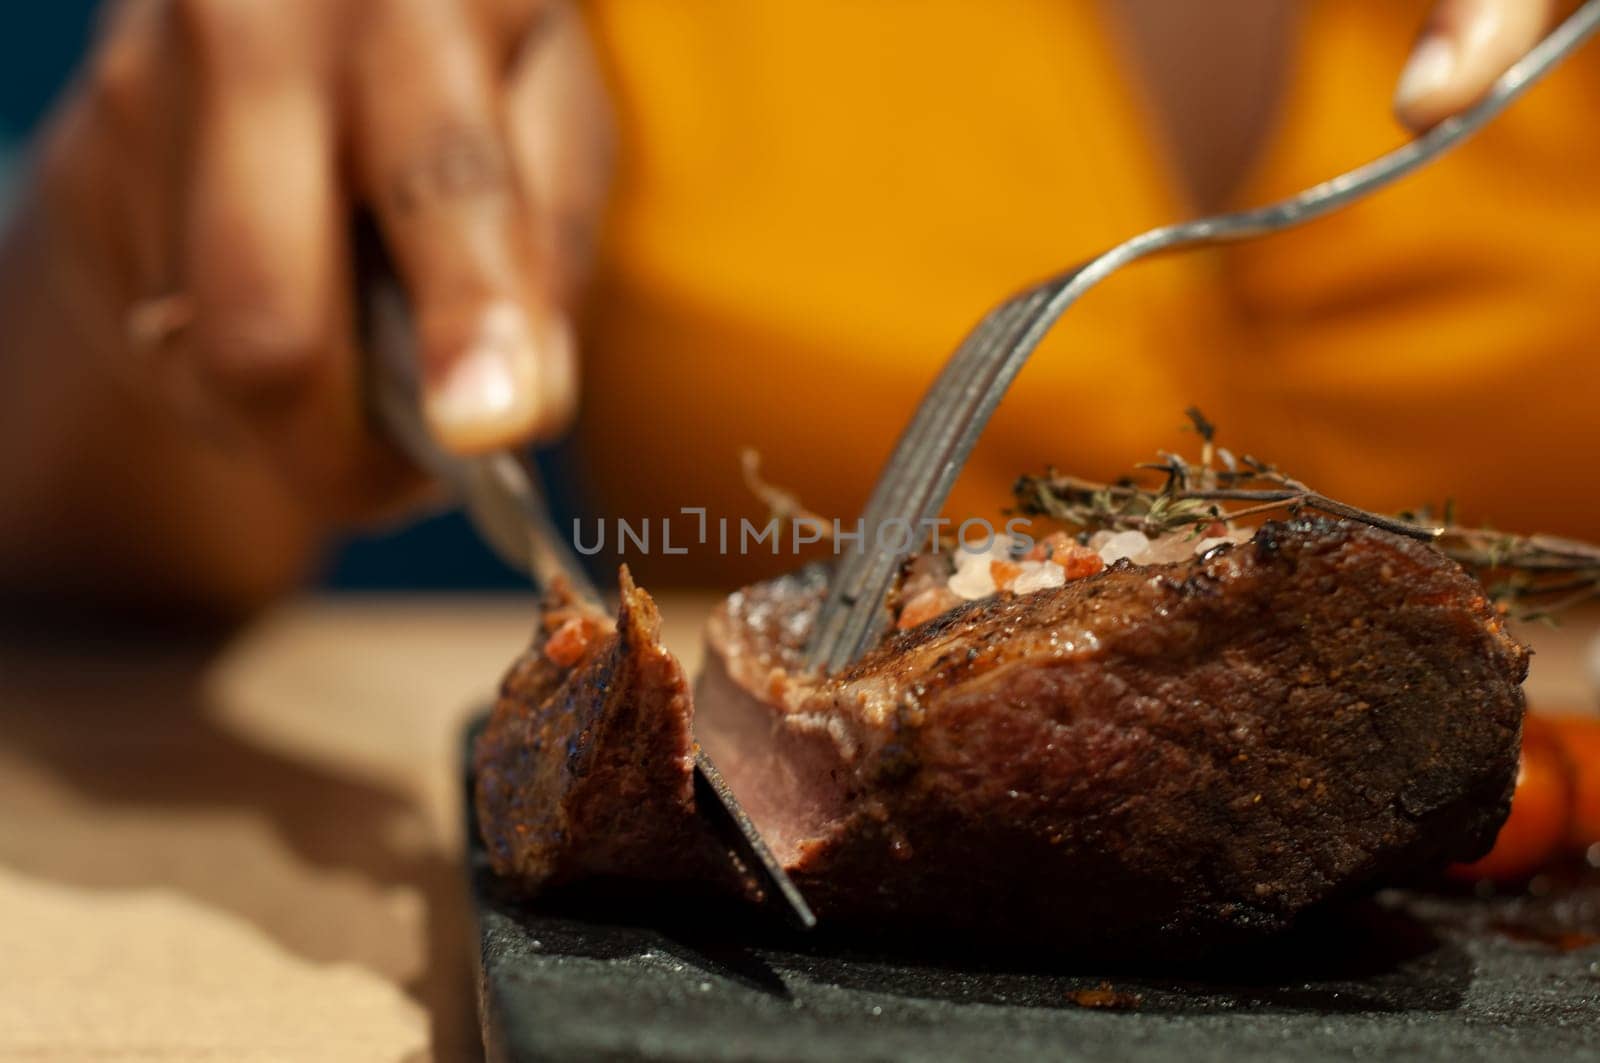 Person Carving Succulent Grilled Steak on a Sizzling Hot Plate at Dinner by Raulmartin